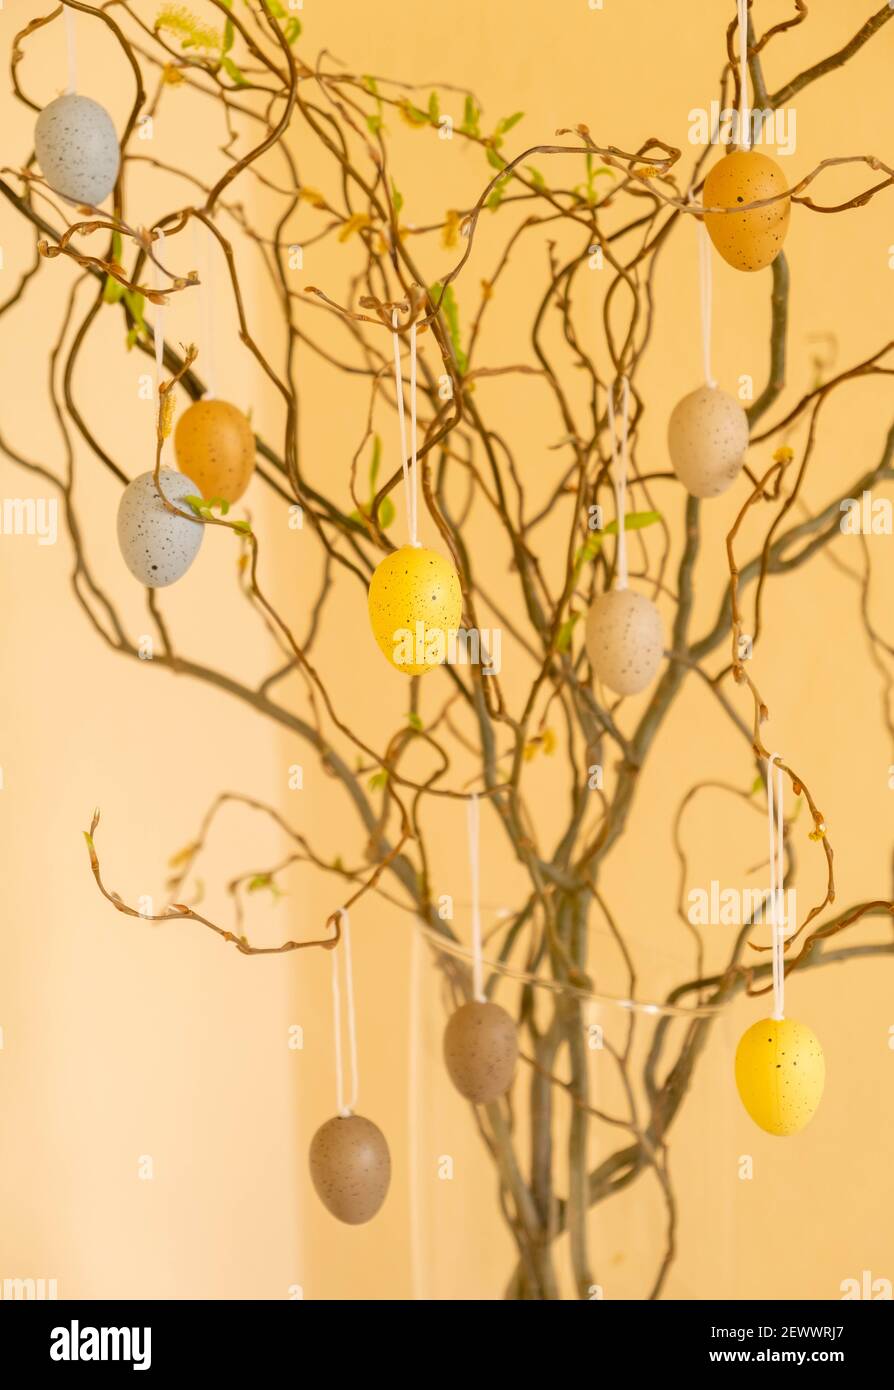 Frank dutje Tragisch Branches decorated with Easter eggs. Decorations for the Easter holiday  Stock Photo - Alamy